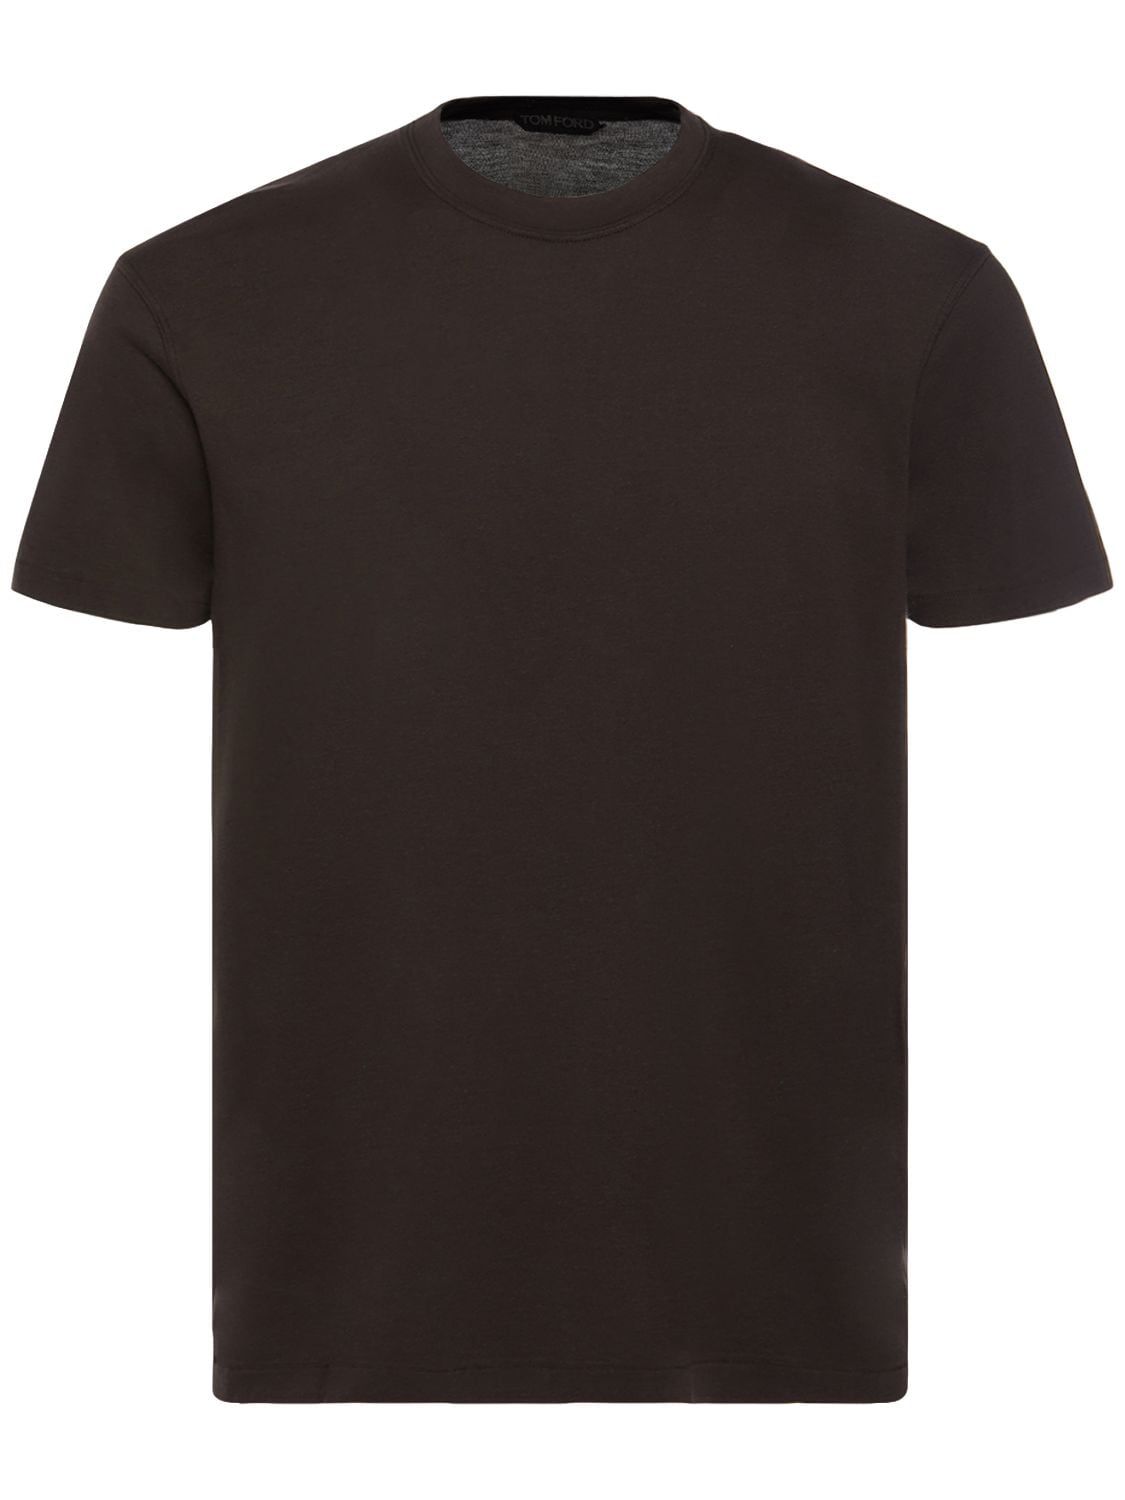 Tom Ford Lyocell & Cotton S/s Crewneck T-shirt In Dark Chocolate